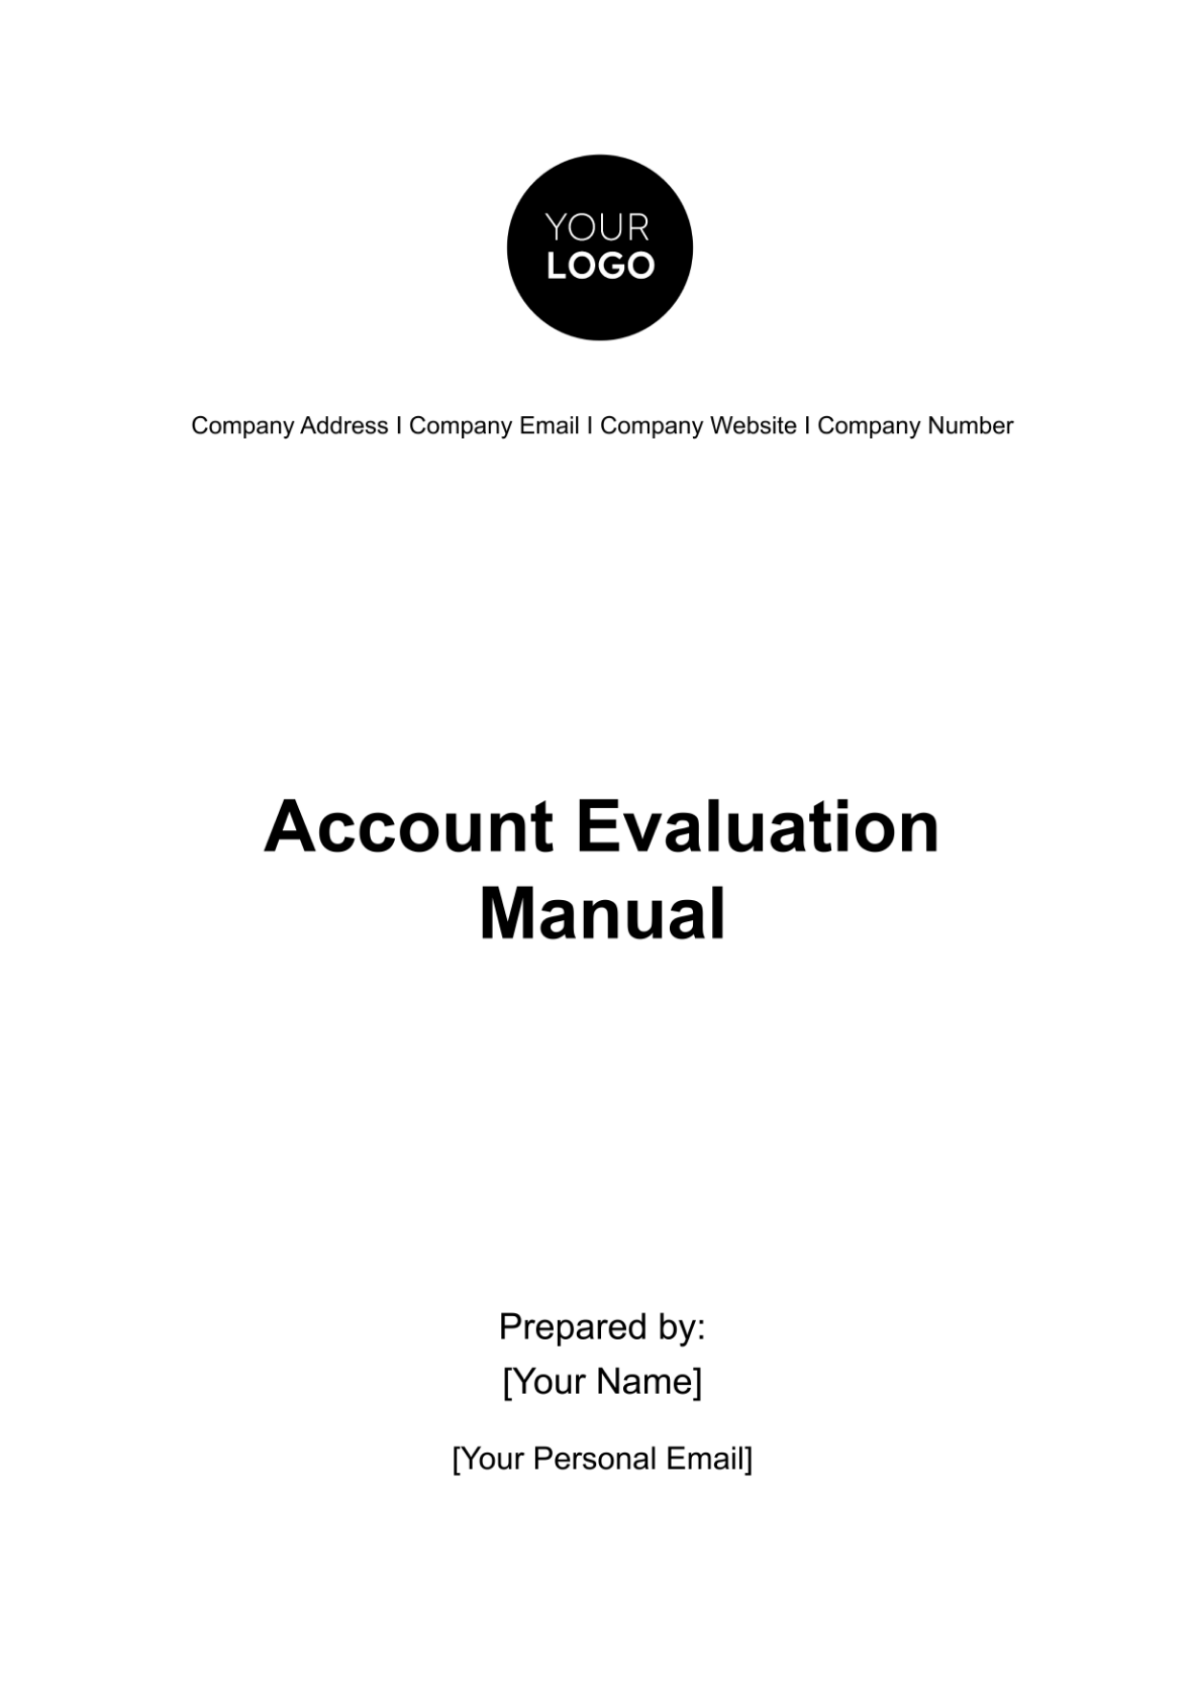 Account Evaluation Manual Template